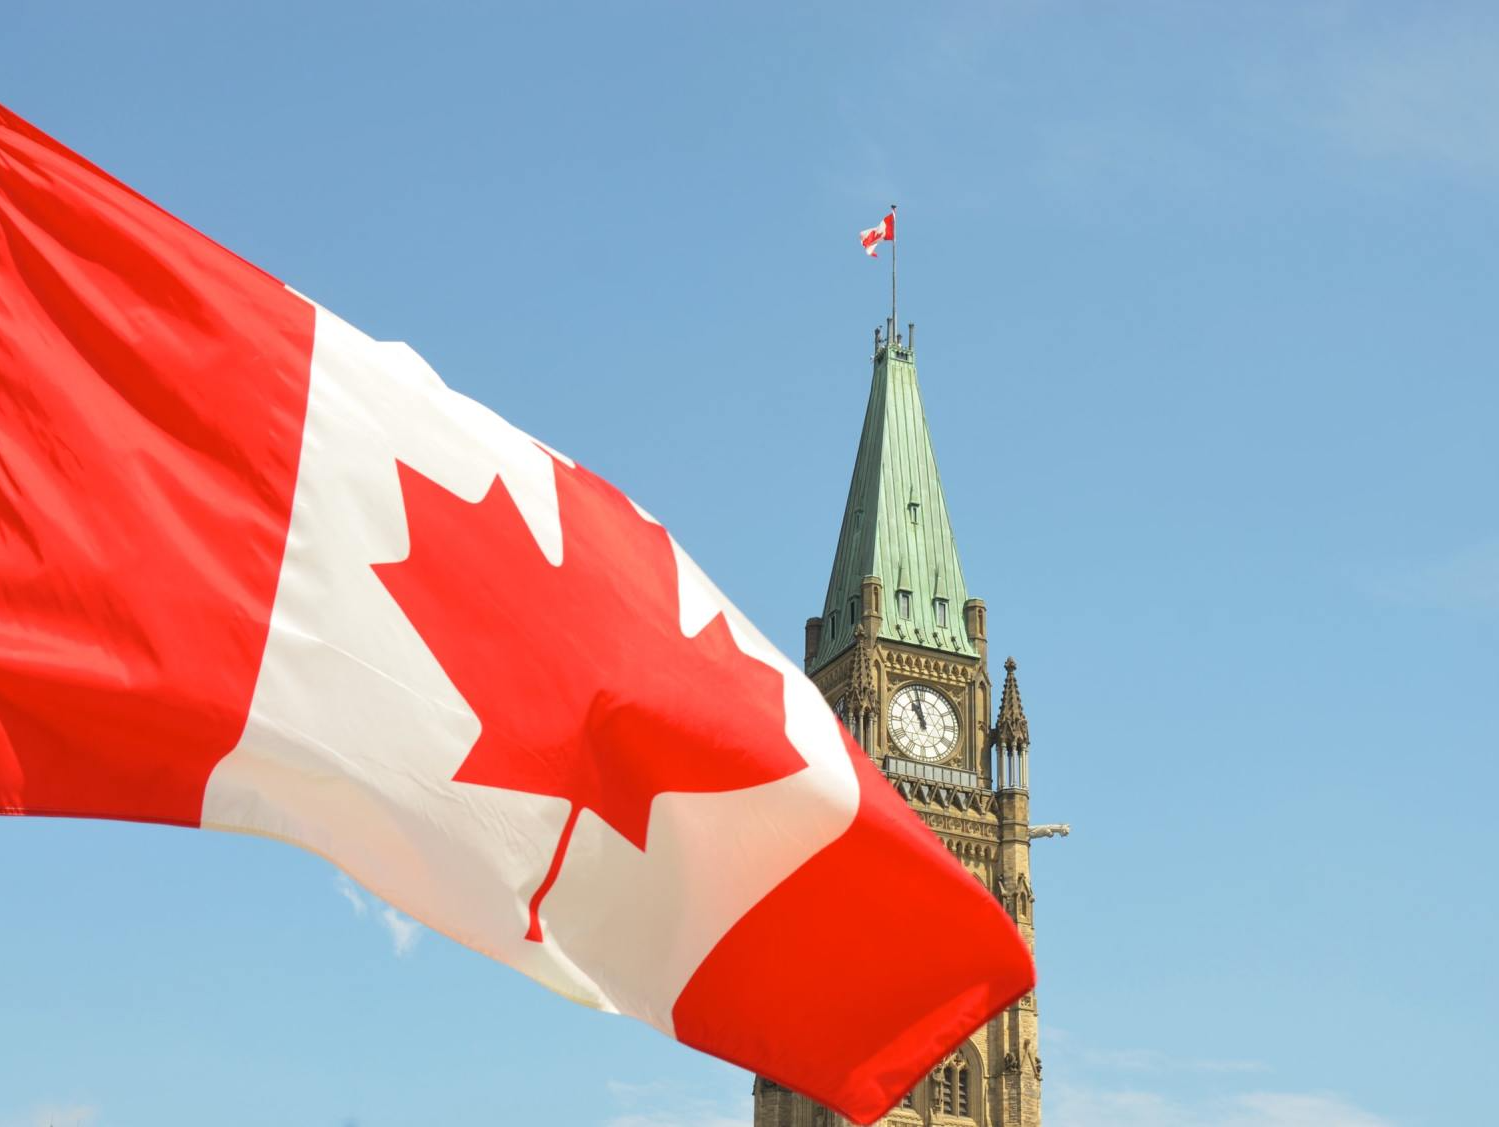 Canadian flag hoisted in front of Parliament Hill in Ottawa